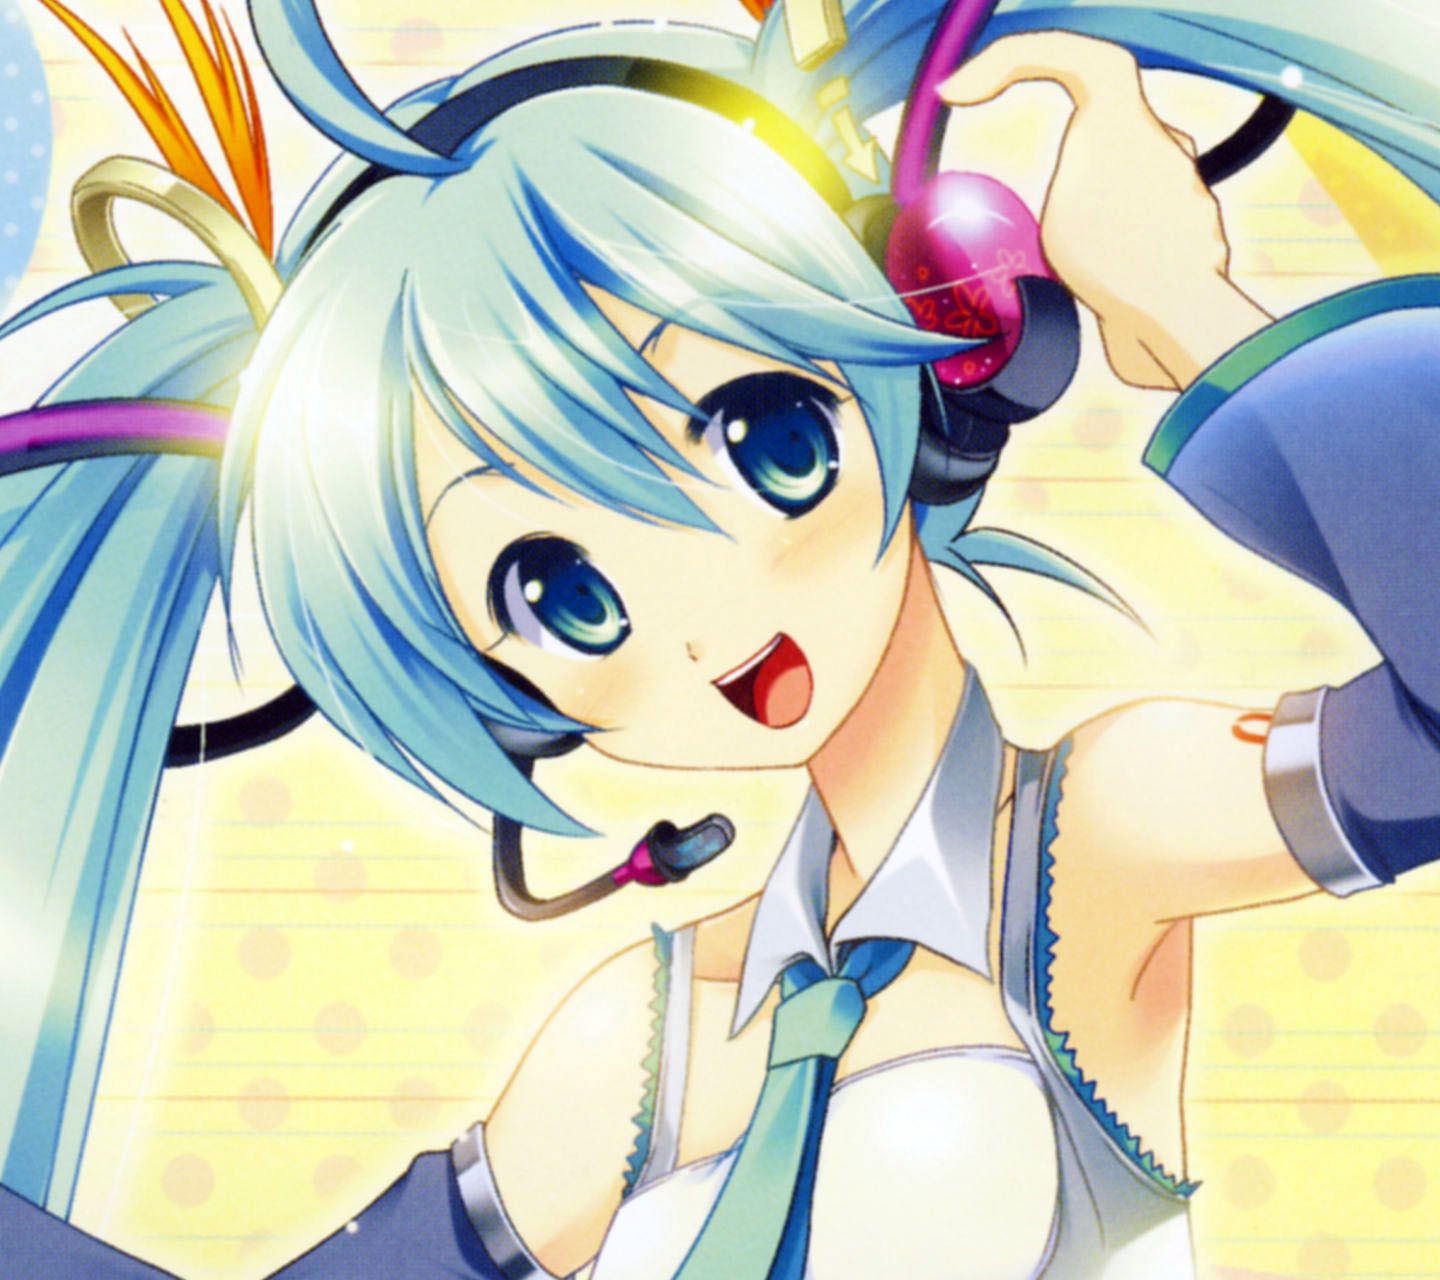 Vocaloid Android壁紙 2 初音ミク アニメ壁紙ネット Pc Android Iphone壁紙 画像